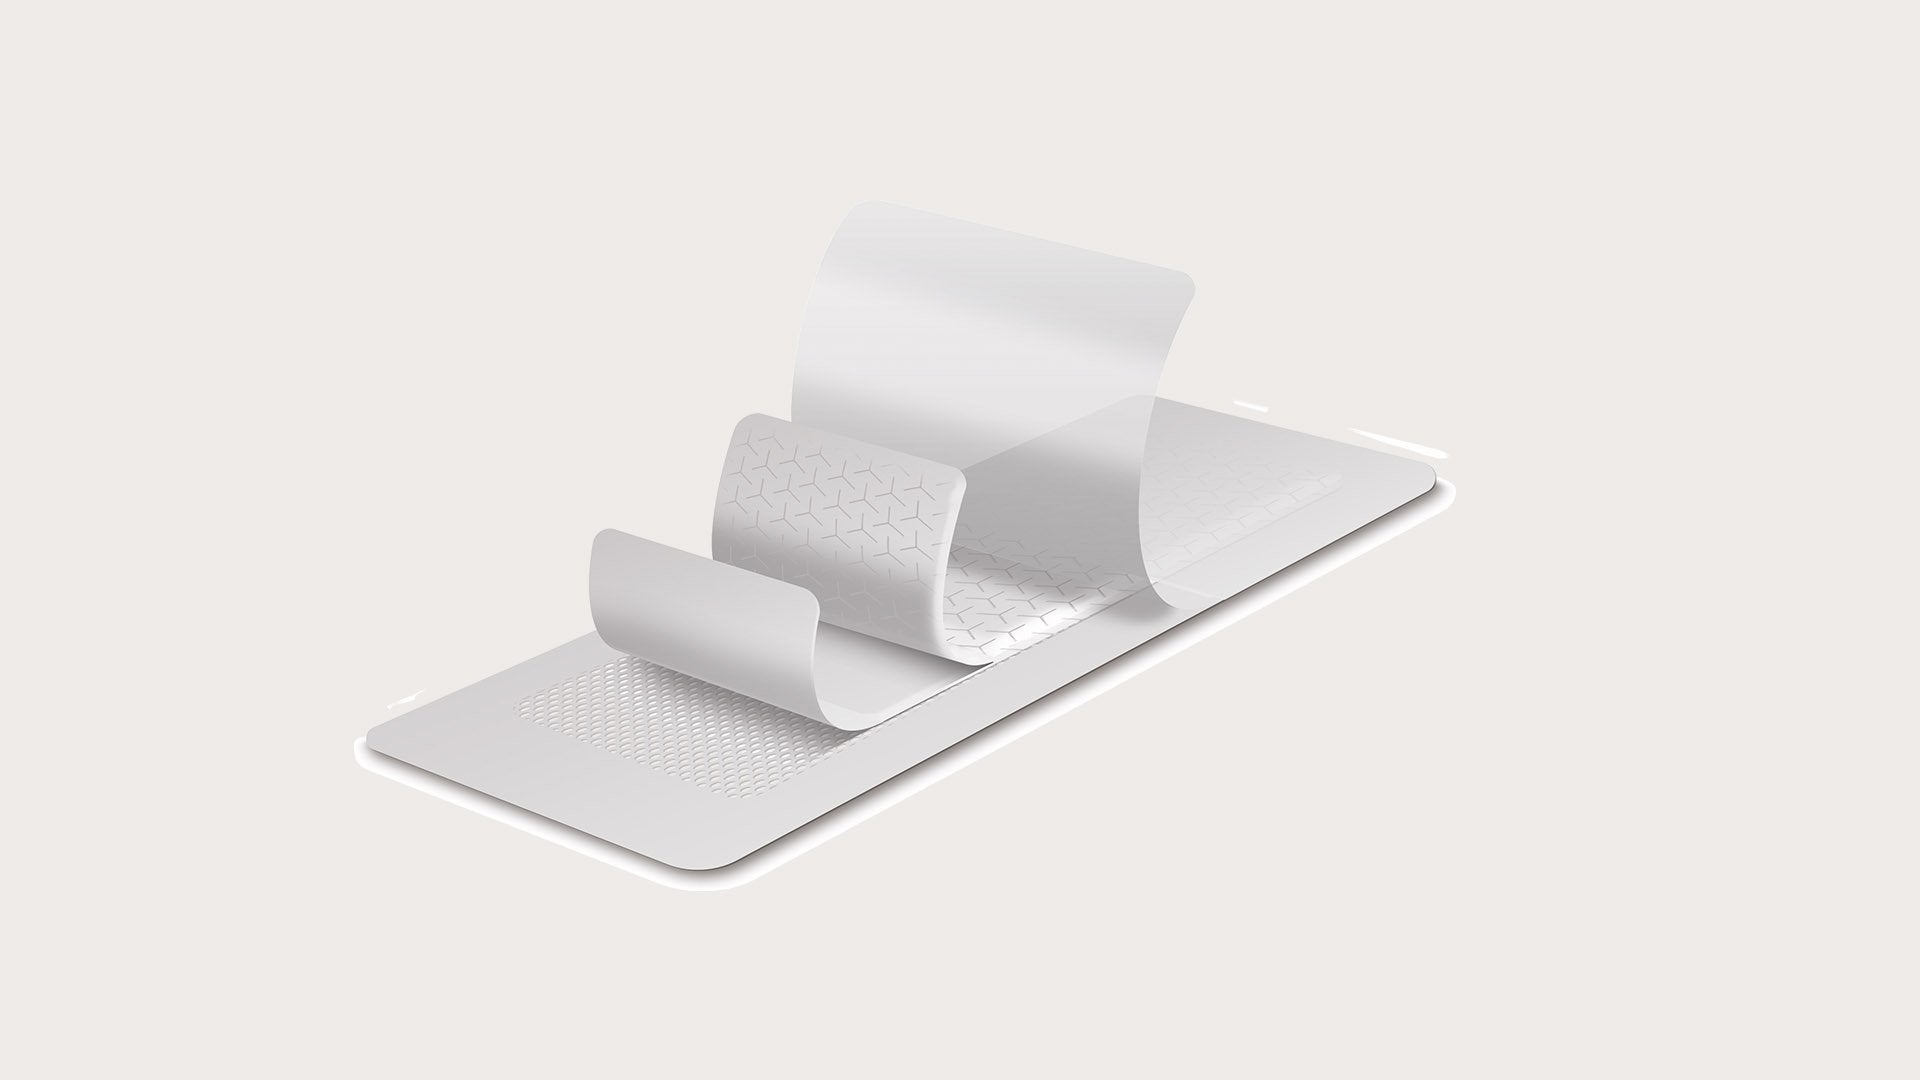 Mepilex Border Post-Op Self Adhesive Absorbent Foam Dressing With Safetac & Flex Innovation - Box of 10